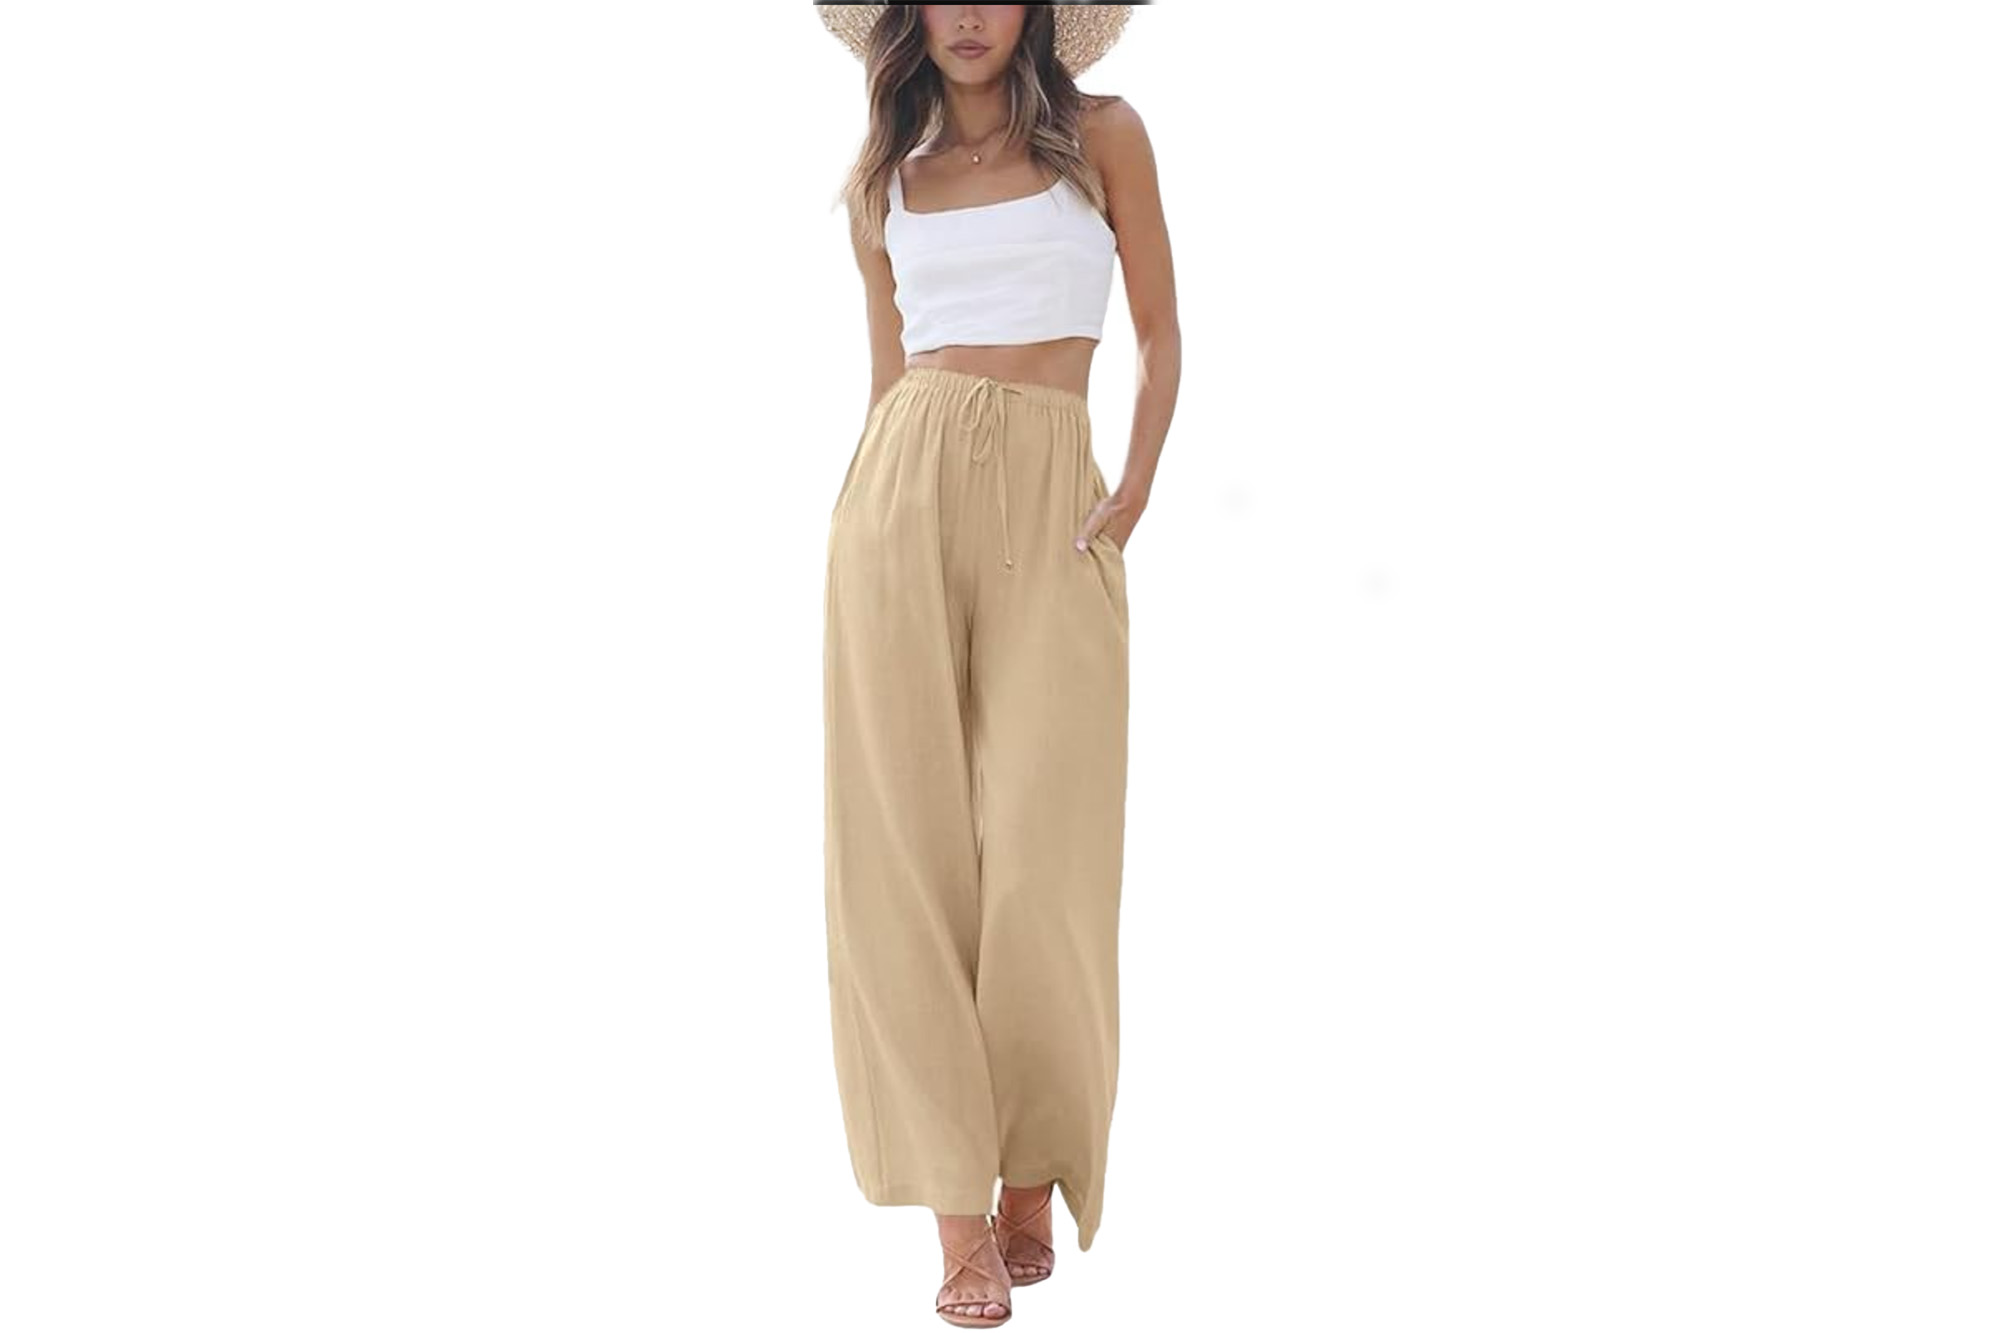 Backless Crop Top With Palazzo Pants Indo Western Dress, Indian Dress | eBay